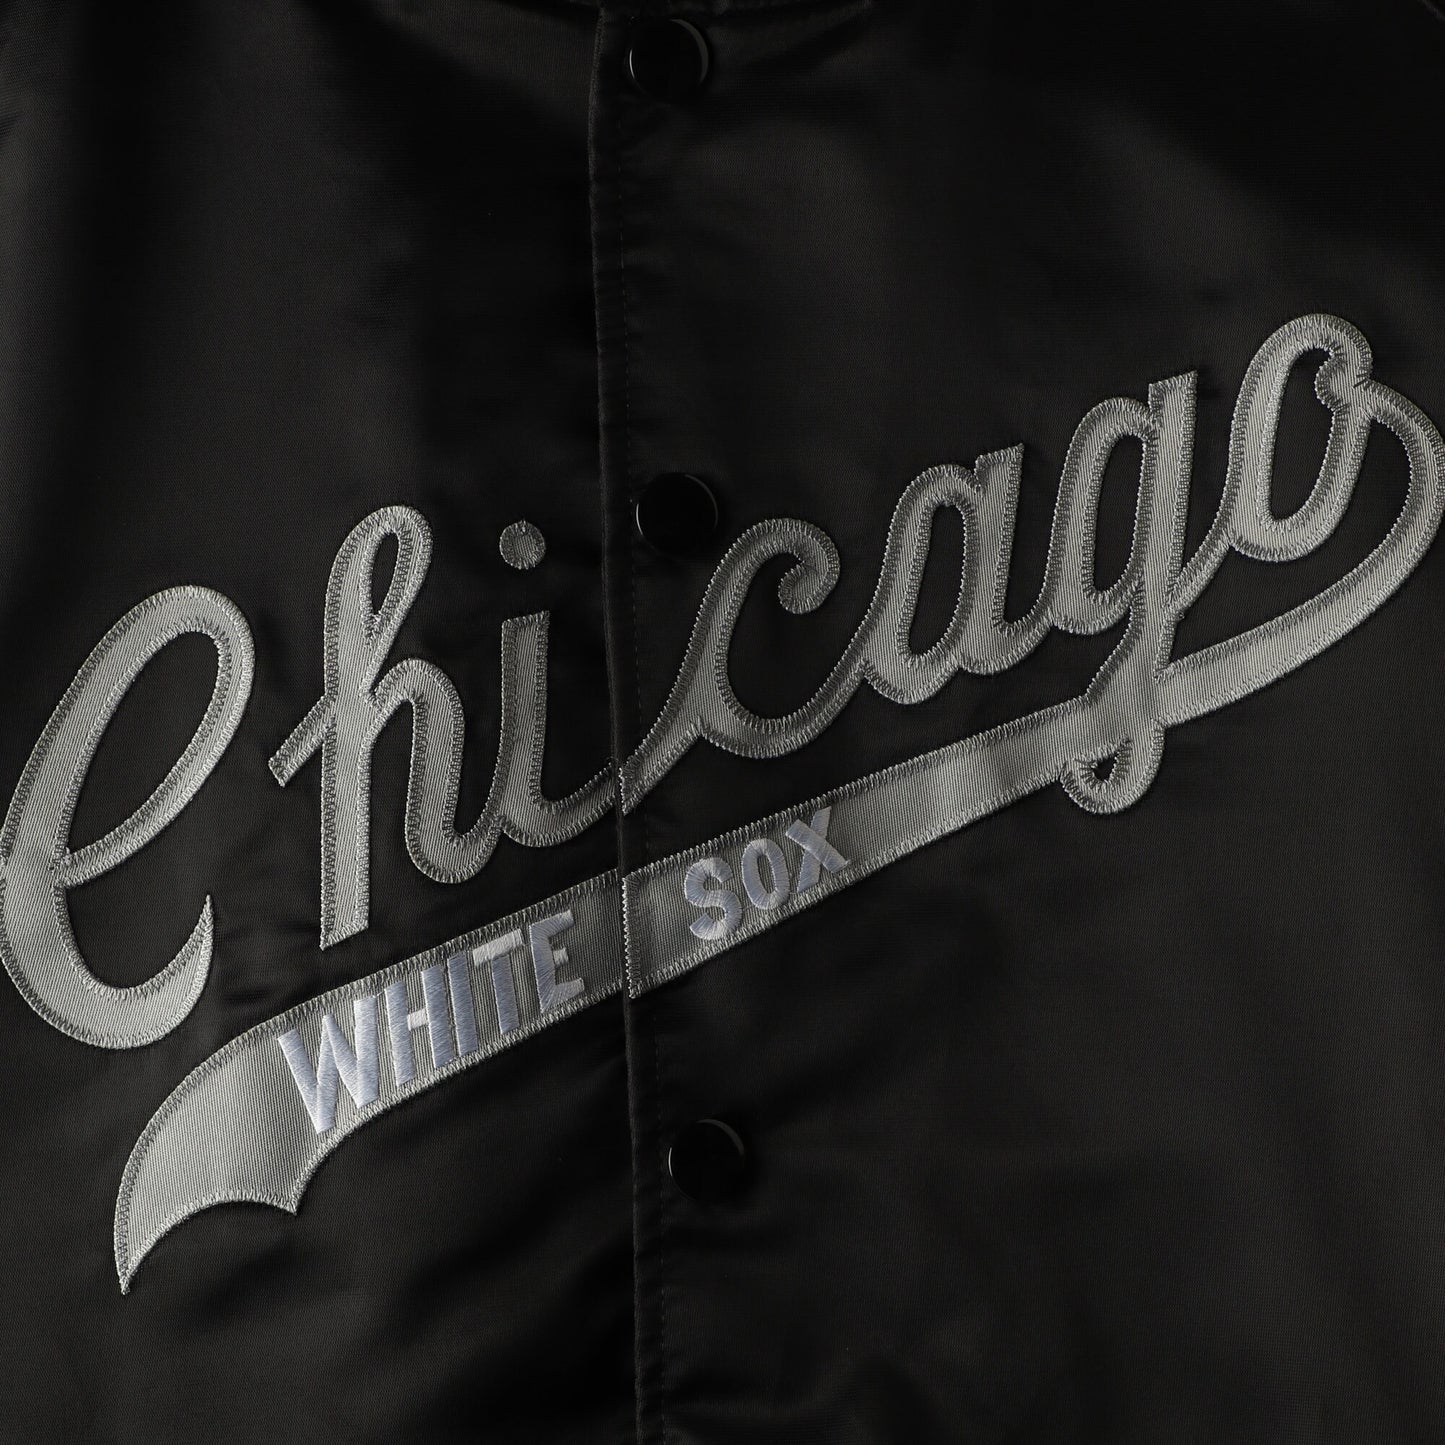 Men's Chicago White Sox Mitchell & Ness Cooperstown Collection Black Satin Full-Snap Jacket